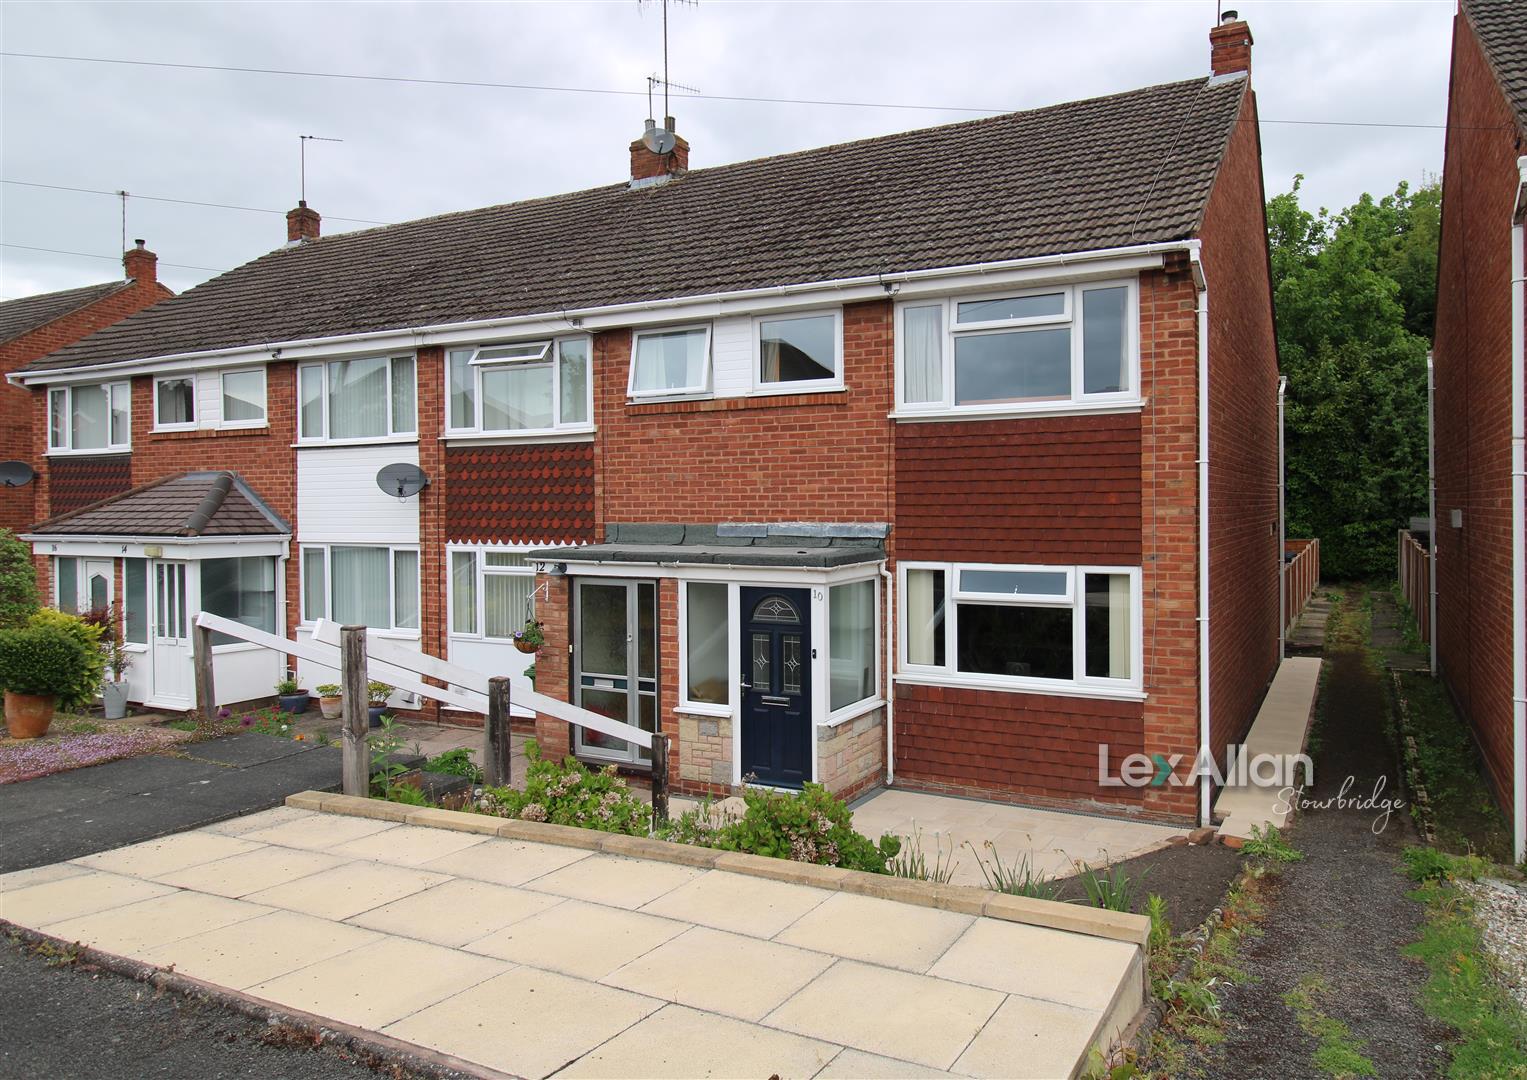 3 bed  for sale in Pargeter Street, Stourbridge, DY8 